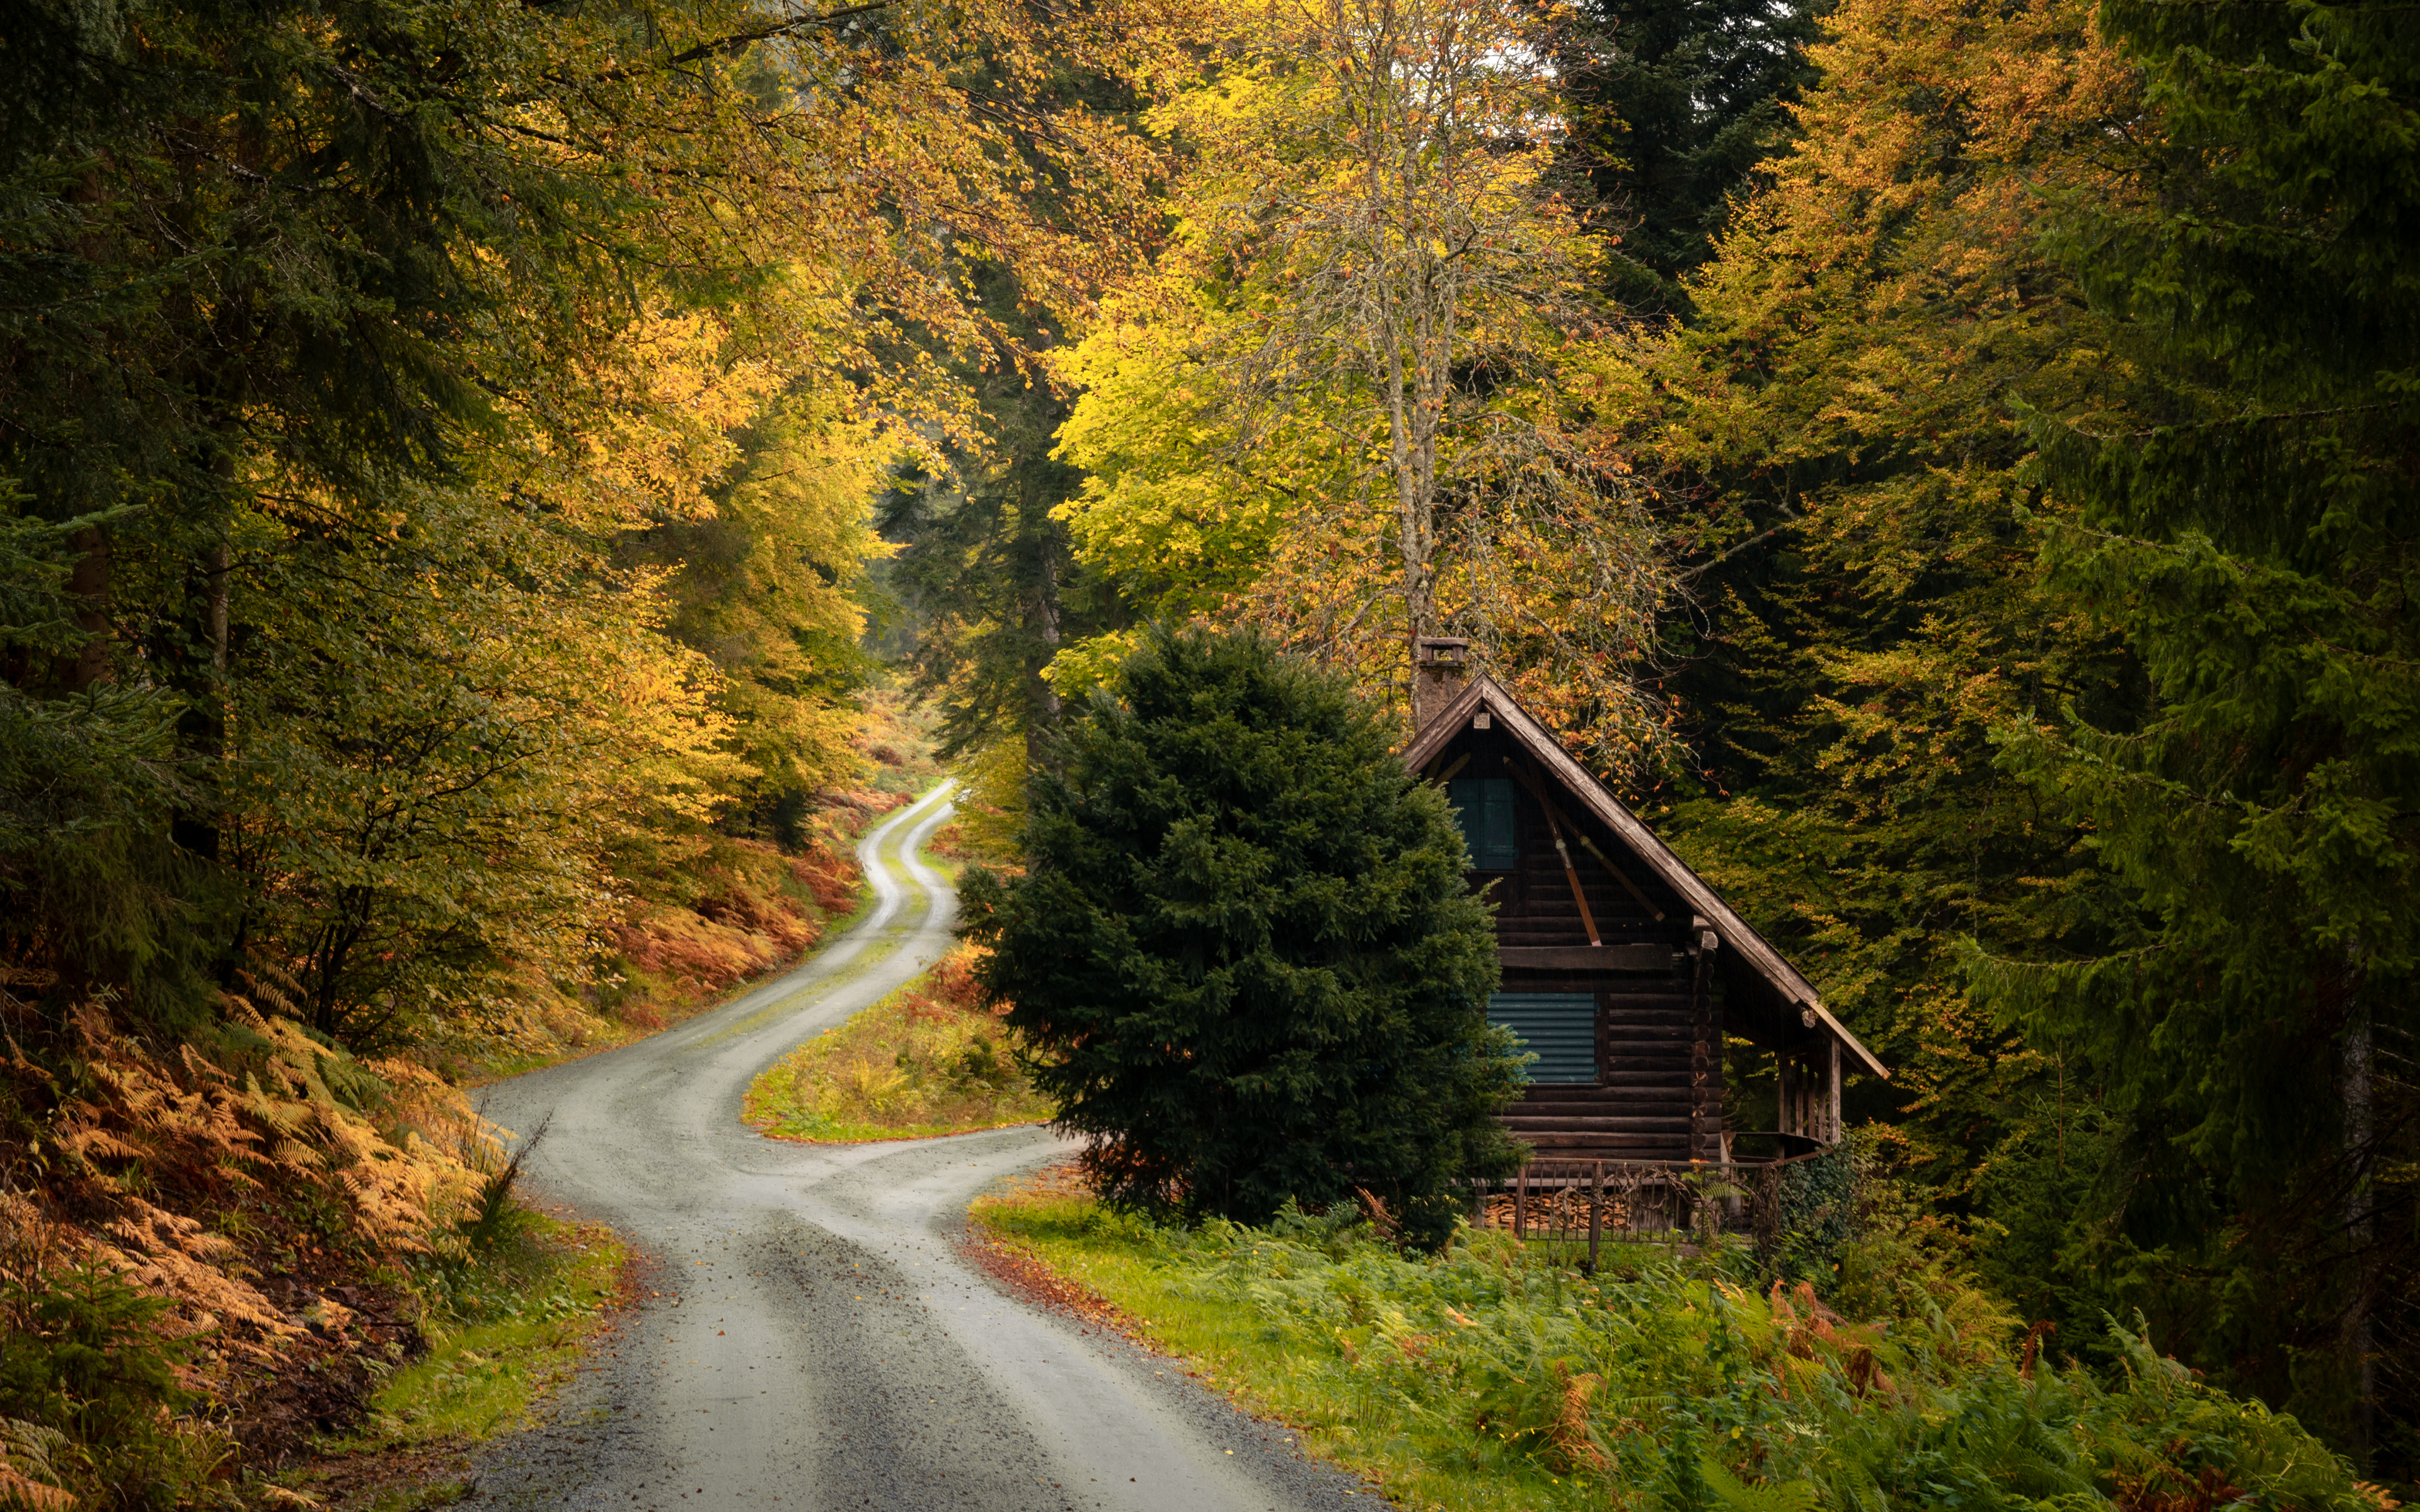 General 3840x2400 nature road fall plants trees grass house cabin Baden-Württemberg Germany Guido de Kleijn